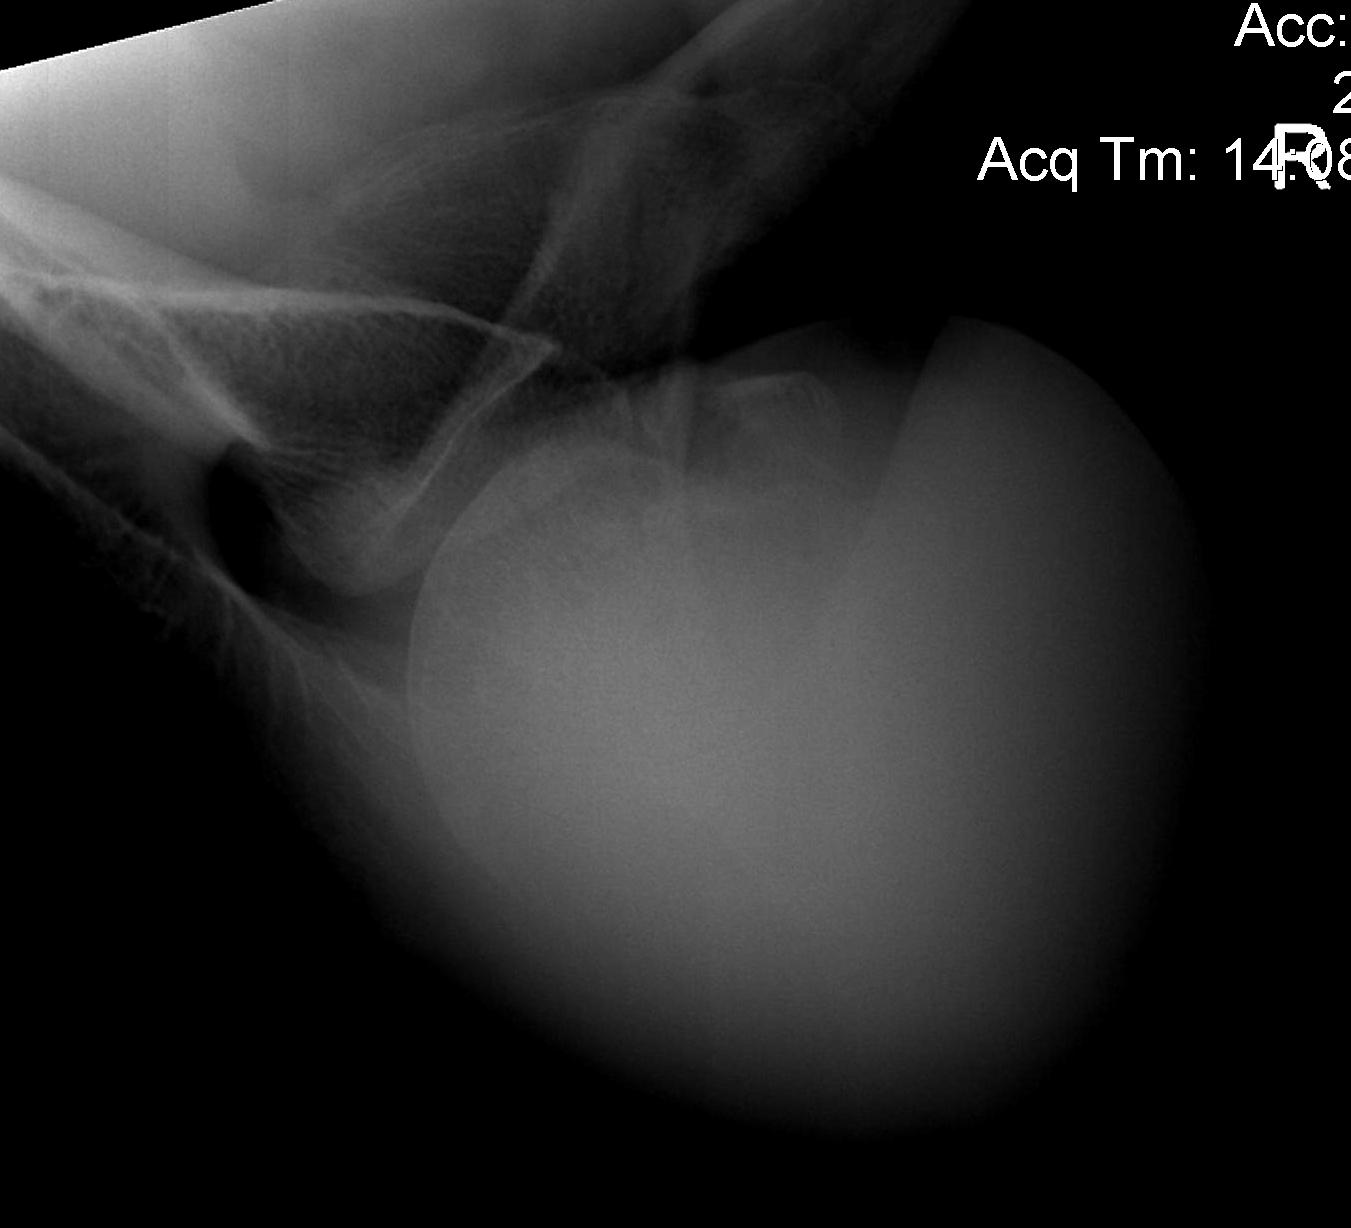 Posterior Shoulder Dislocation Post Reduction Anterior Hill Sachs